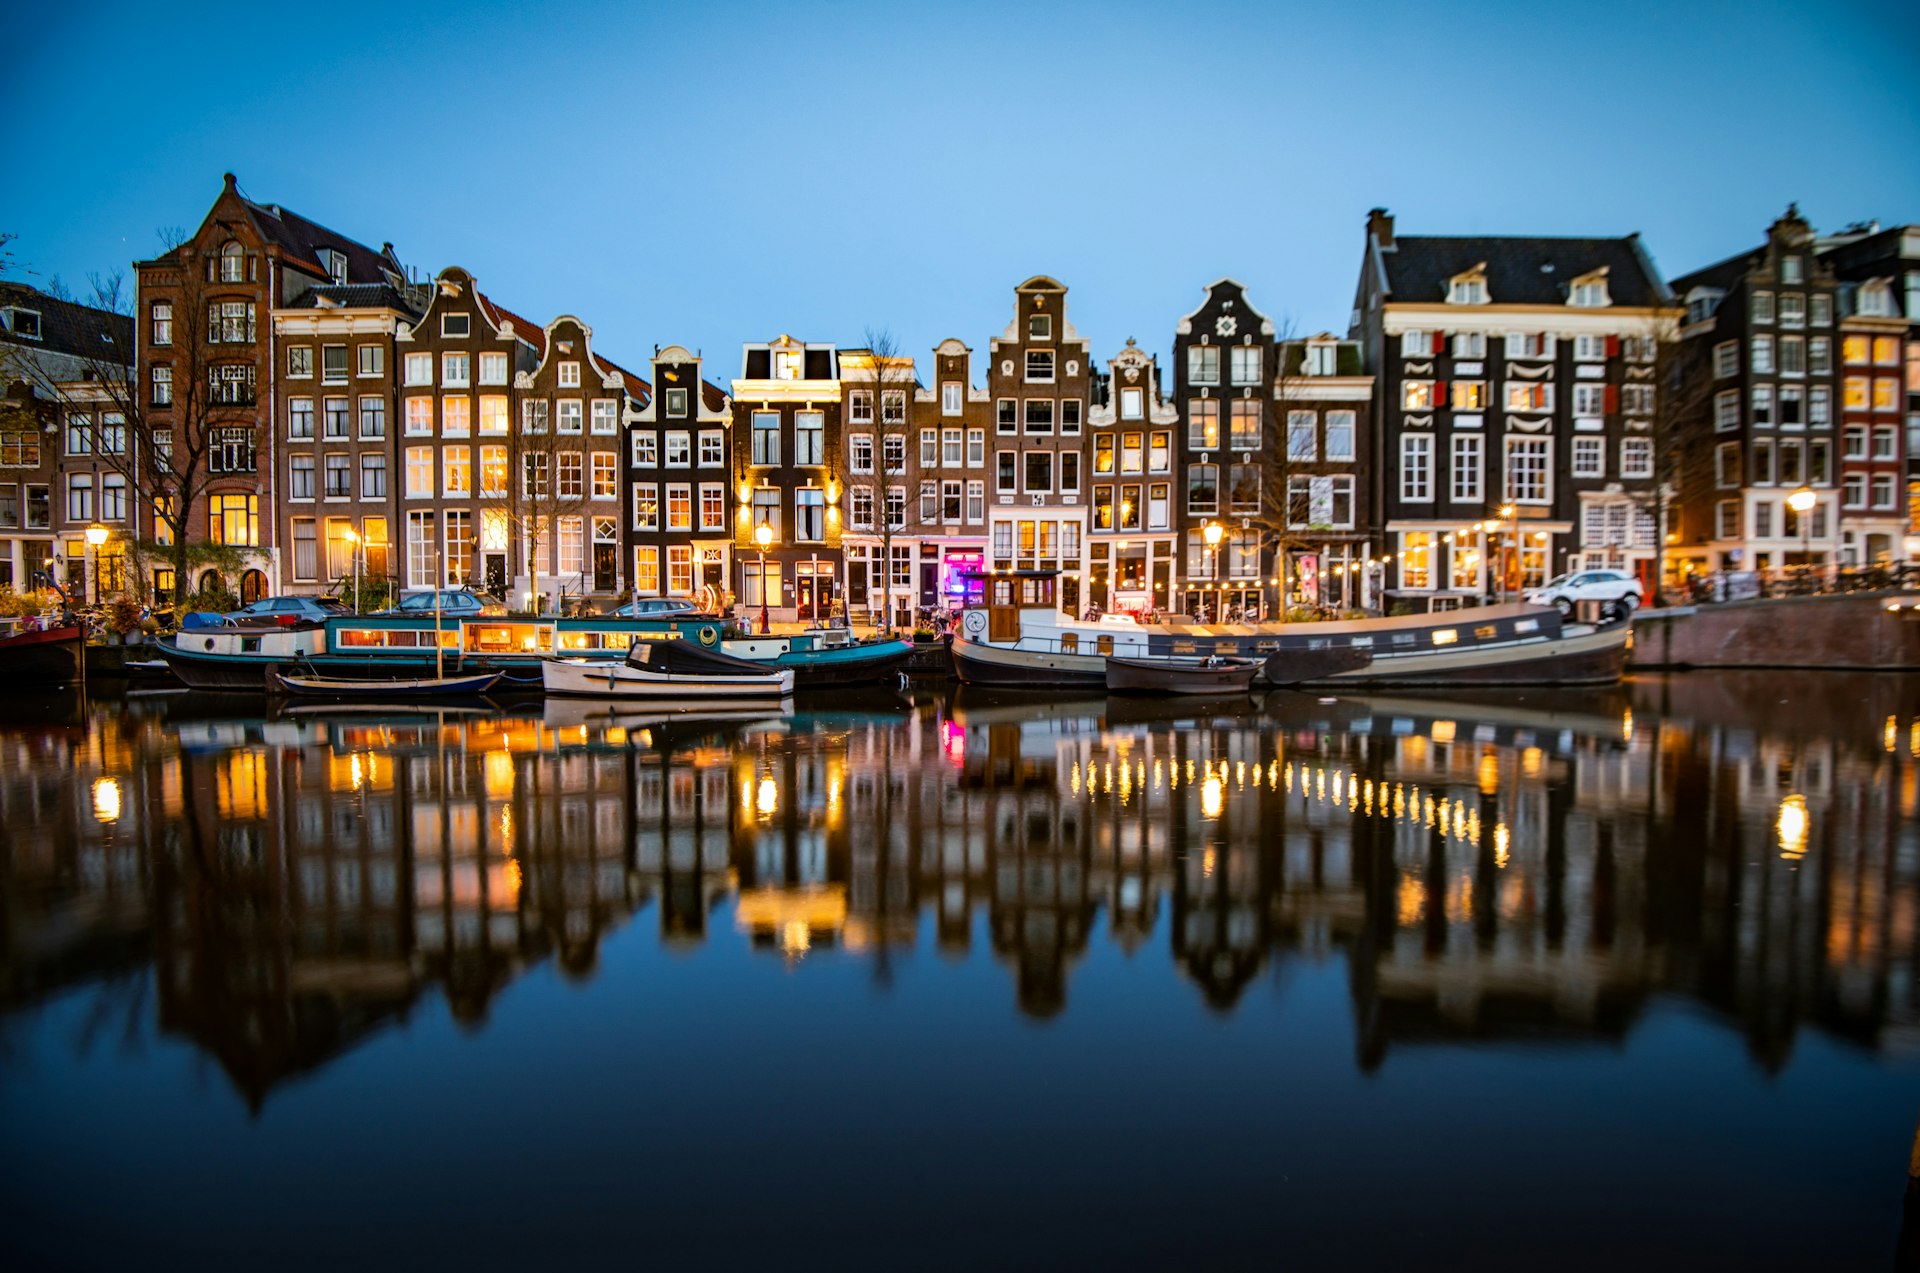 Historic homes along the Singel canal after dark, Amsterdam, the Netherlands